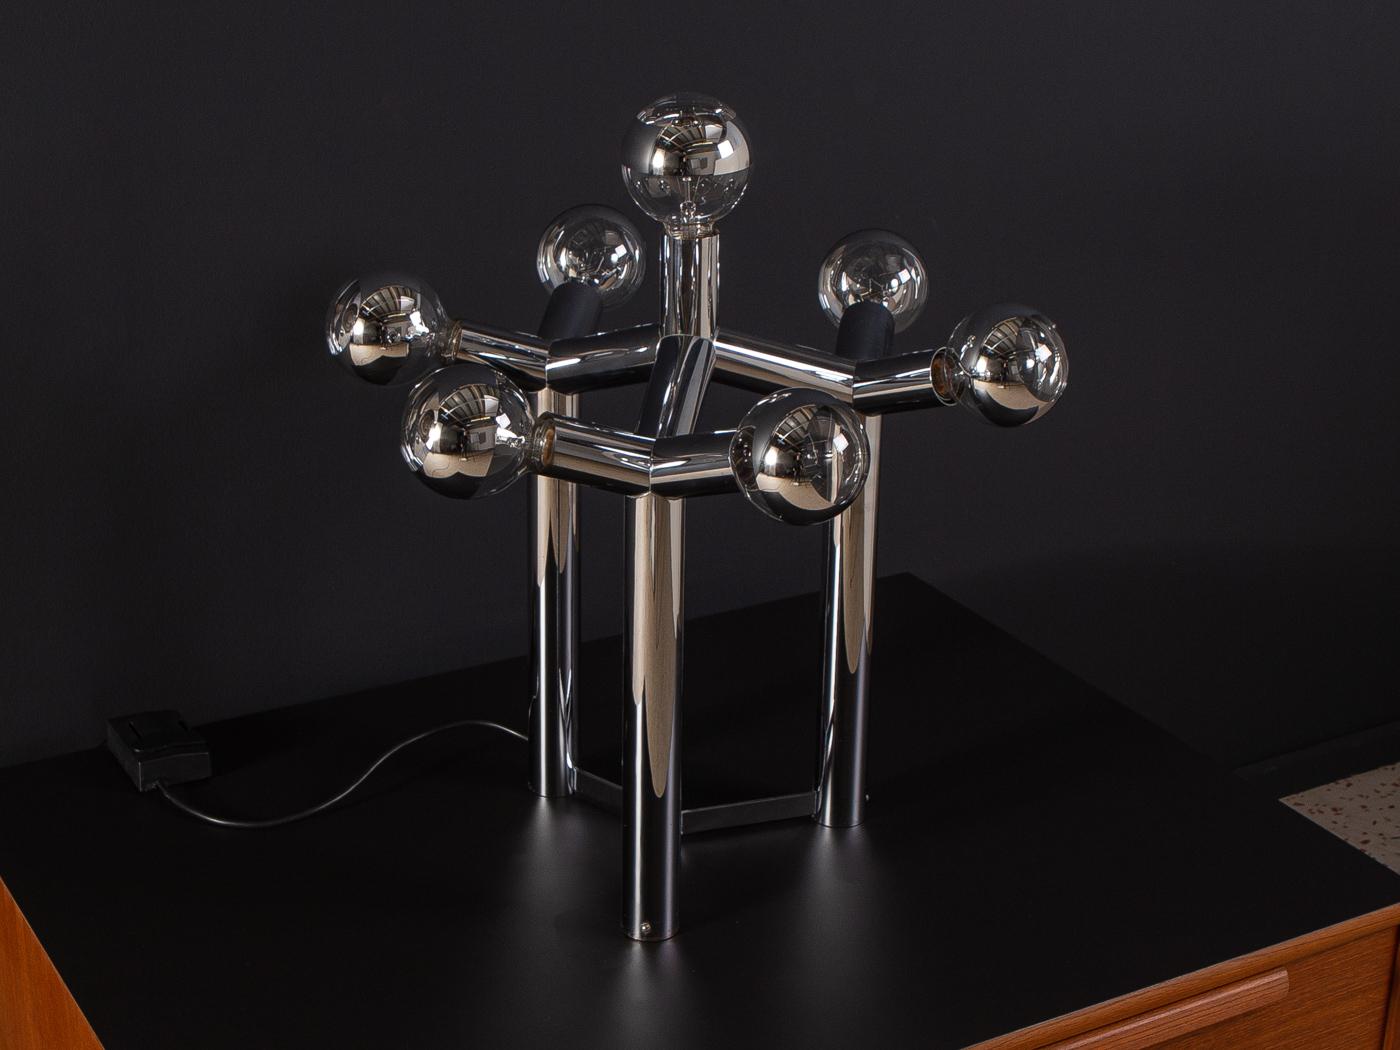 Very rare atomic table lamp from the 1970s. This design classic by J.T. Kalmar/Vienna is a reminiscent of an atom molecule. The lamp has 7 Globe light bulbs (E27) and can be adjusted in brightness via a dimmer. Made in Austria.